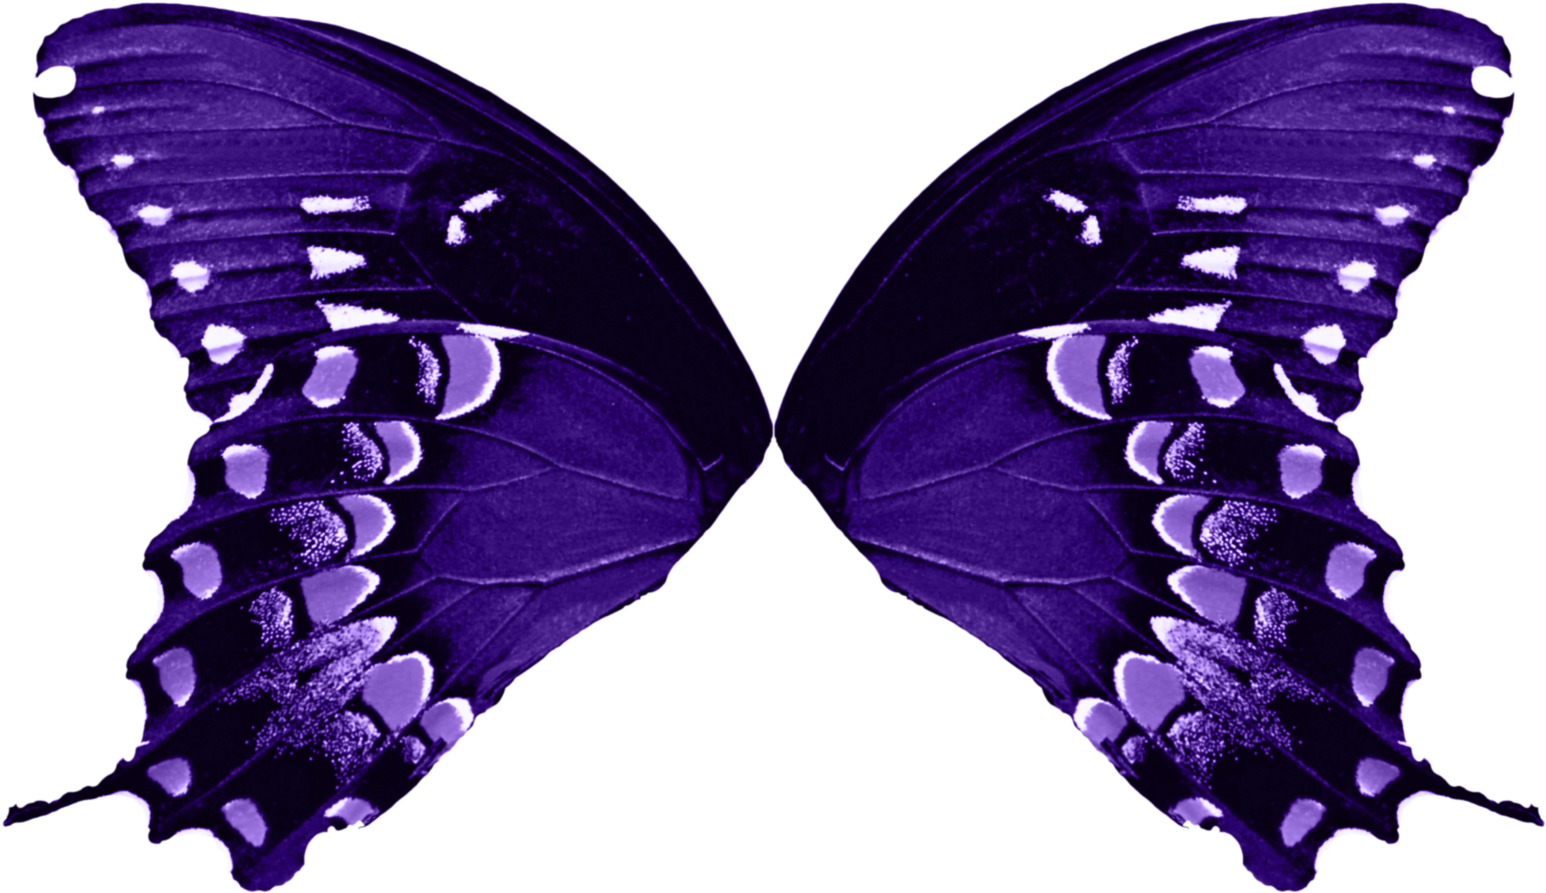 Butterfly Wings Cut Out - Butterfly Wings Transparent Background (1600x1013)